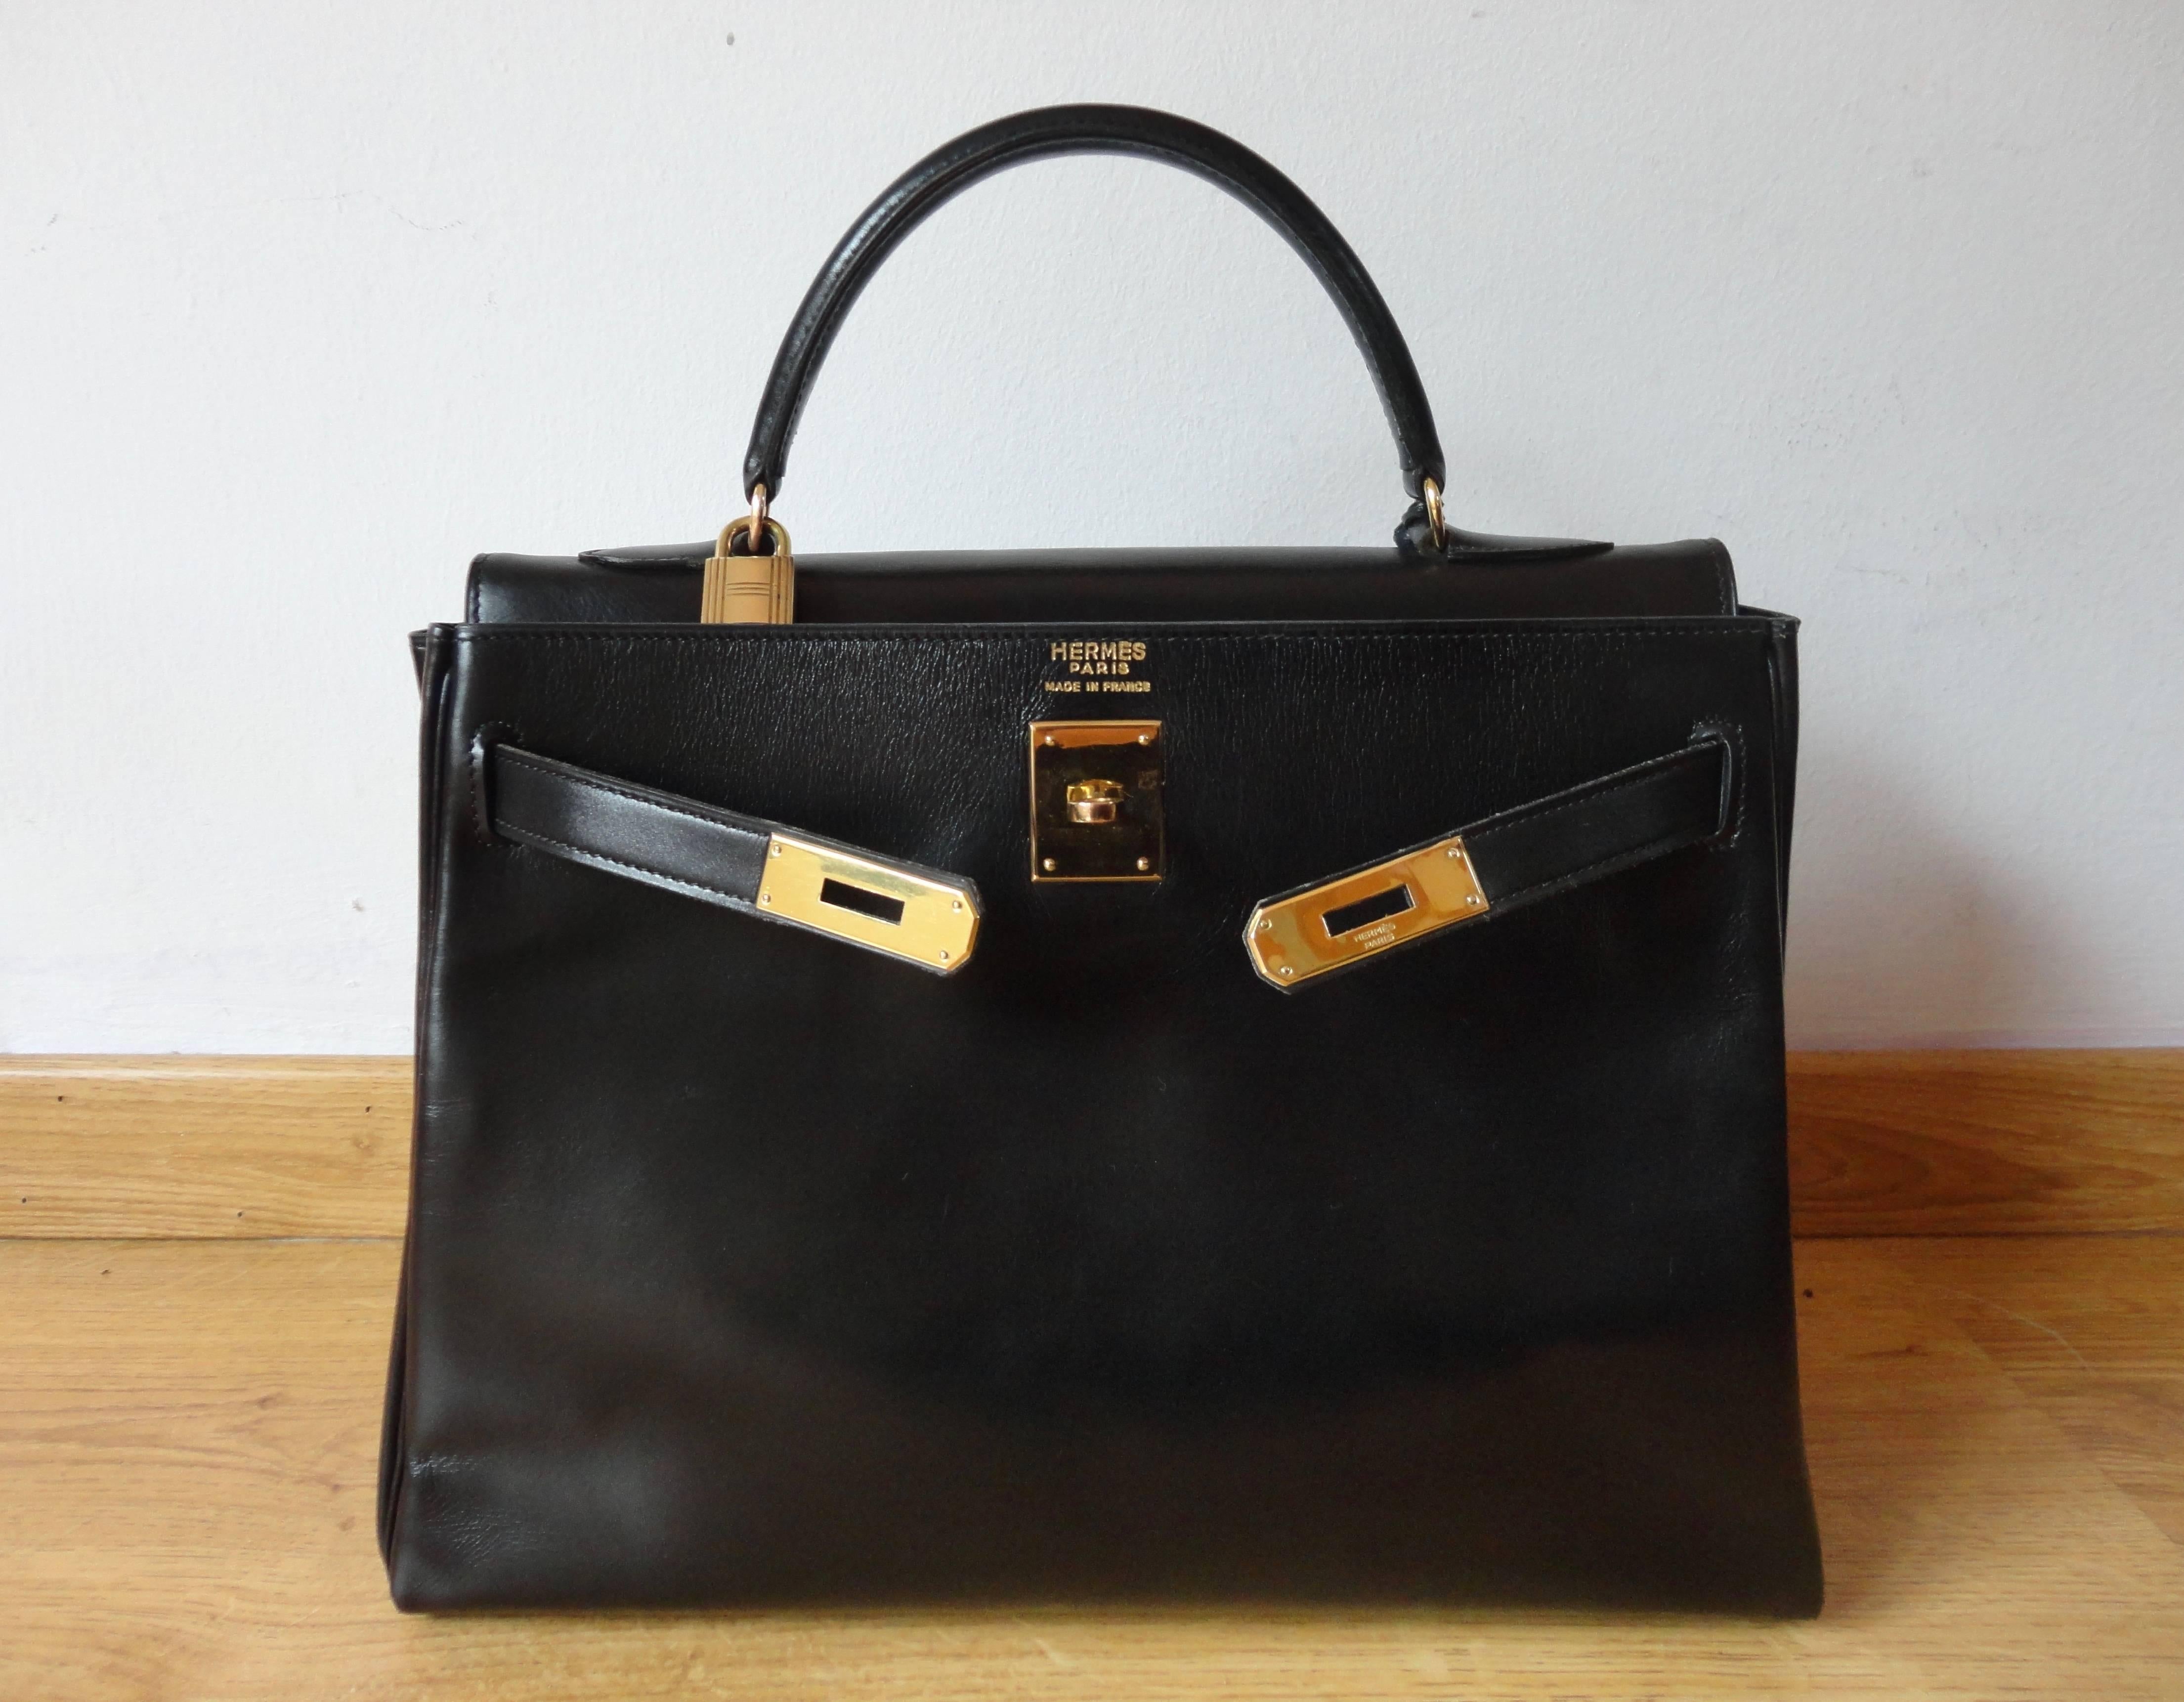 Amazing Vintage Hermes Kelly 32 bag in black smooth box calfskin leather with gold plated hardware.
Excelent pre-loved condition only showing slight scratches on the hardware, in result of its normal use and age. 
Great condition both inside and